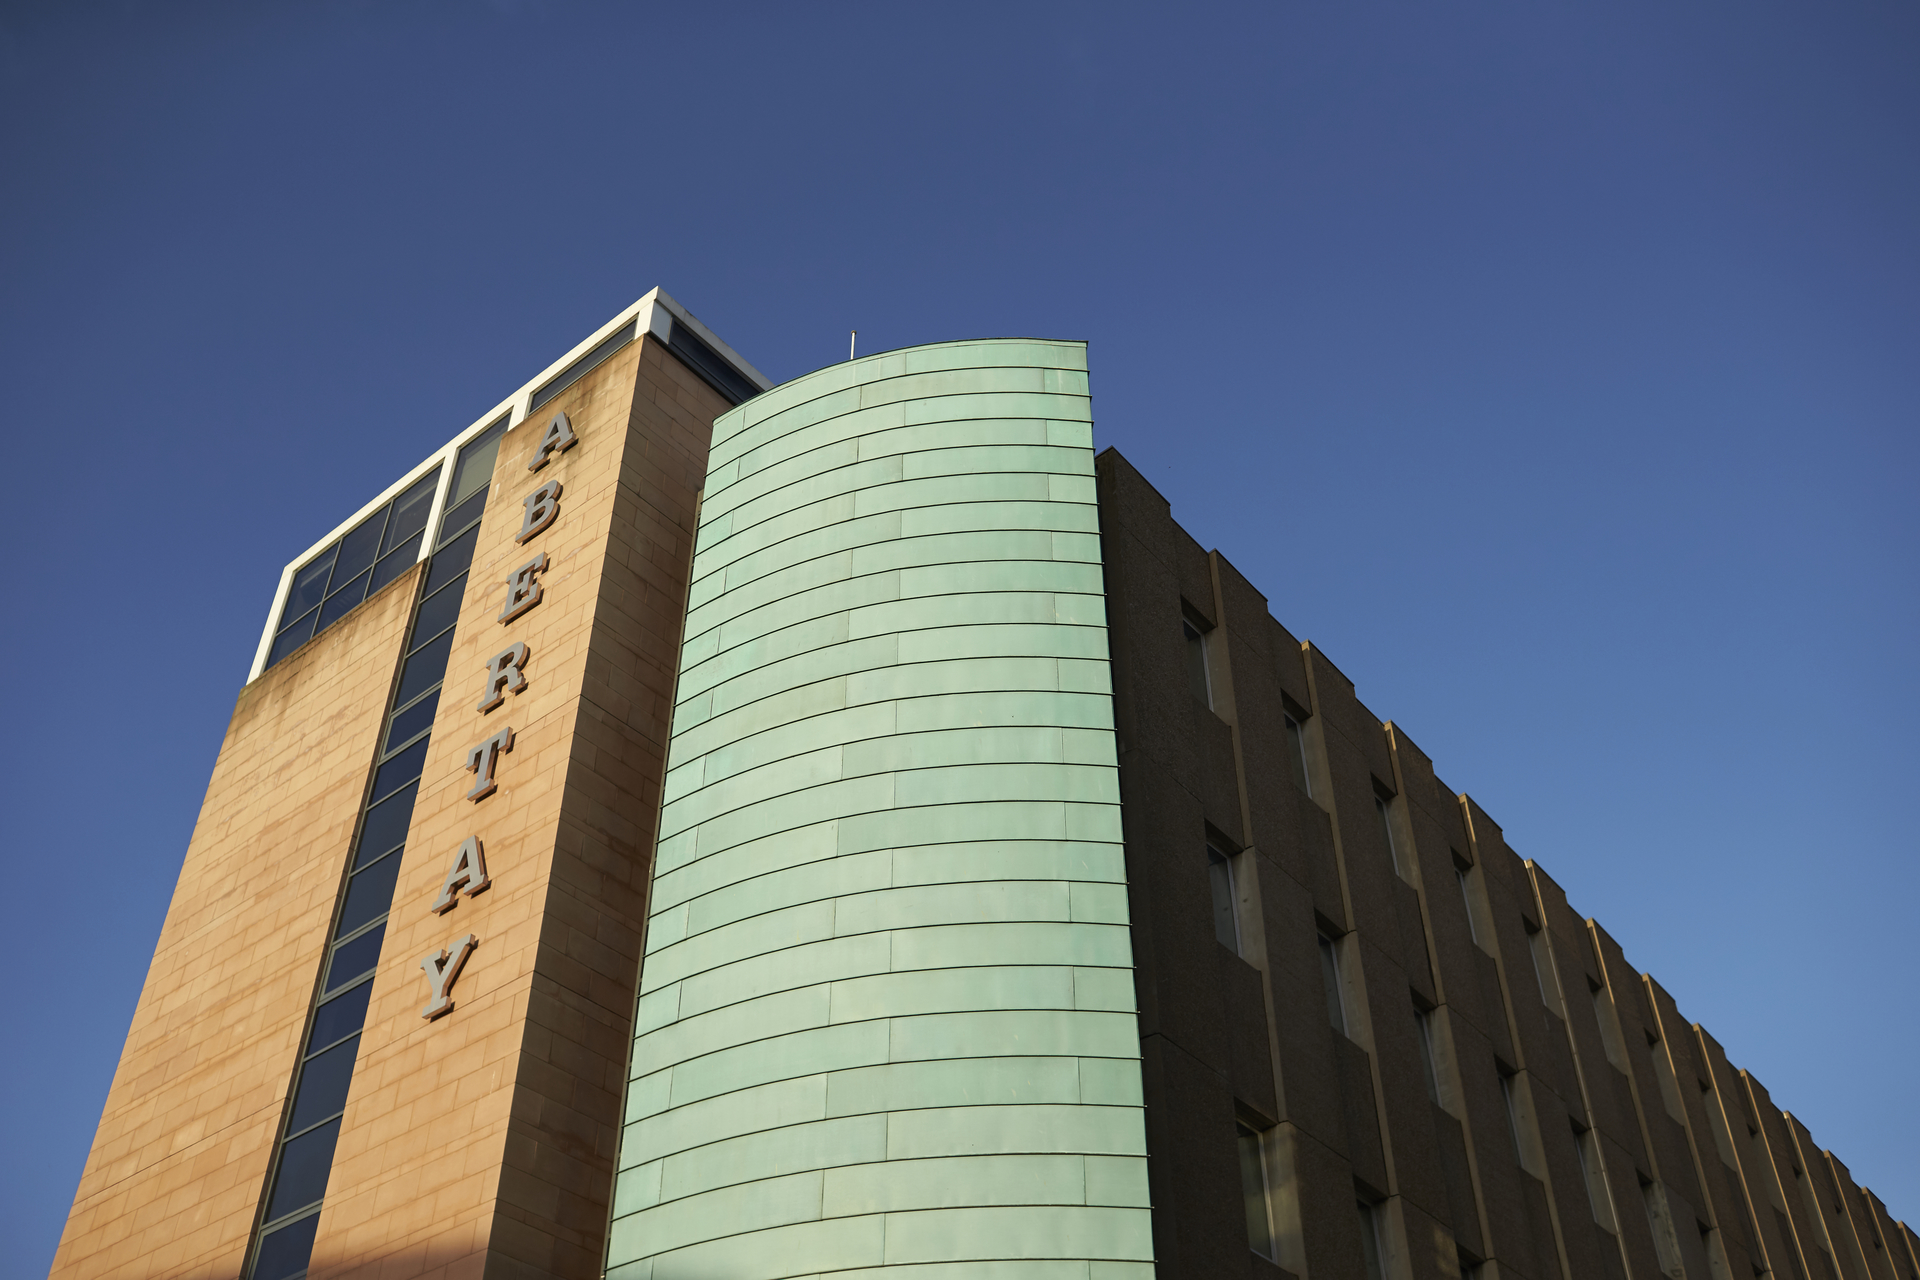 Exterior image of Abertay sign on Kydd building